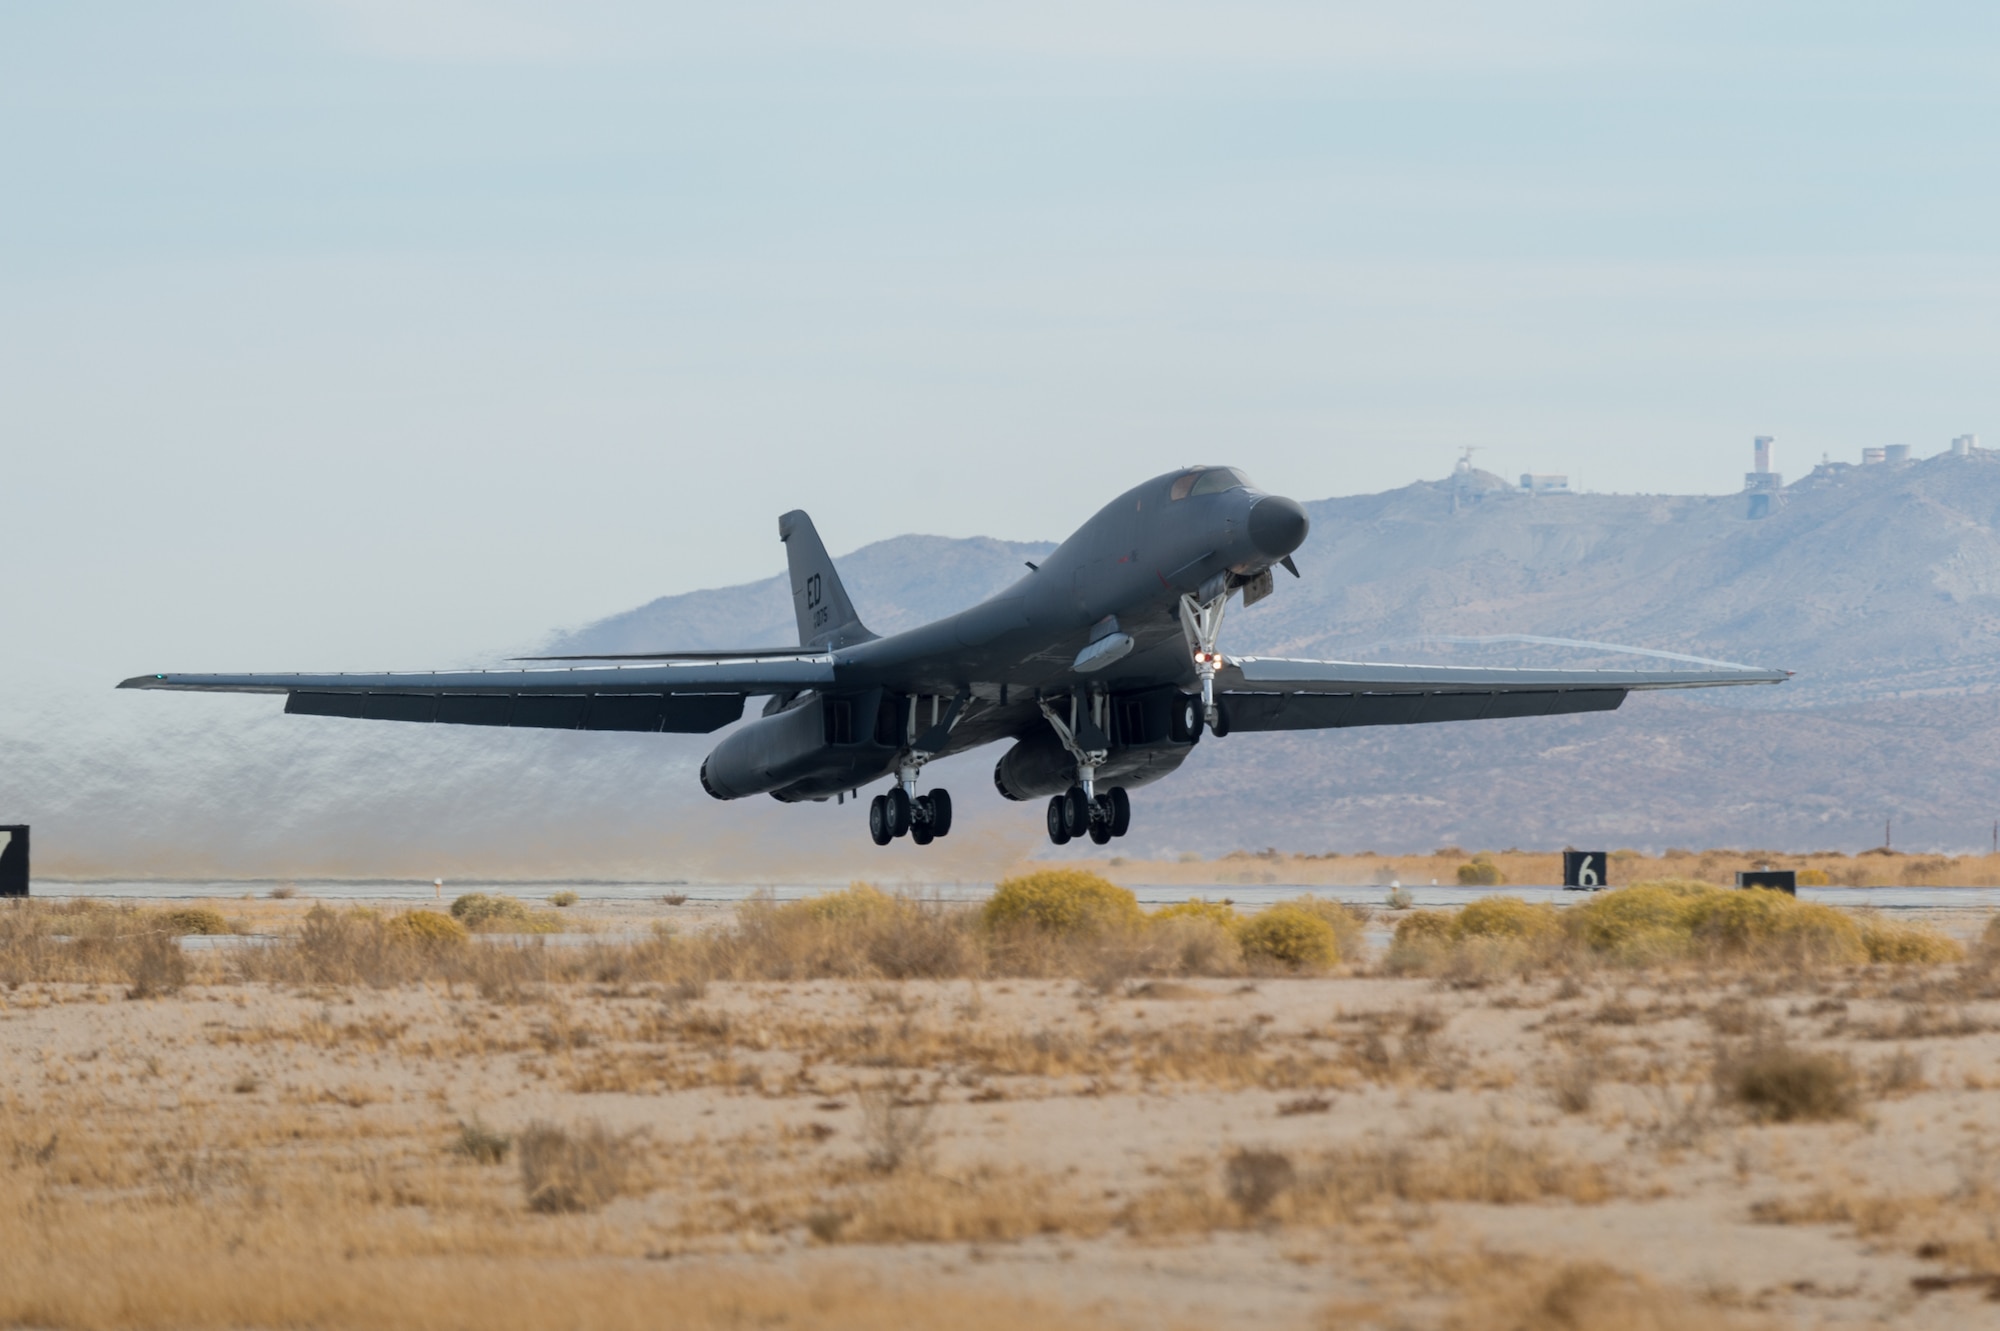 A B-1B Lancer with a Joint Air-to-Surface Standoff Missile (JASSM) takes off from Edwards Air Force Base, California, Nov. 20. The flight was a demonstration of the B-1B’s external weapons carriage capabilities. (Air Force photo by Richard Gonzales)